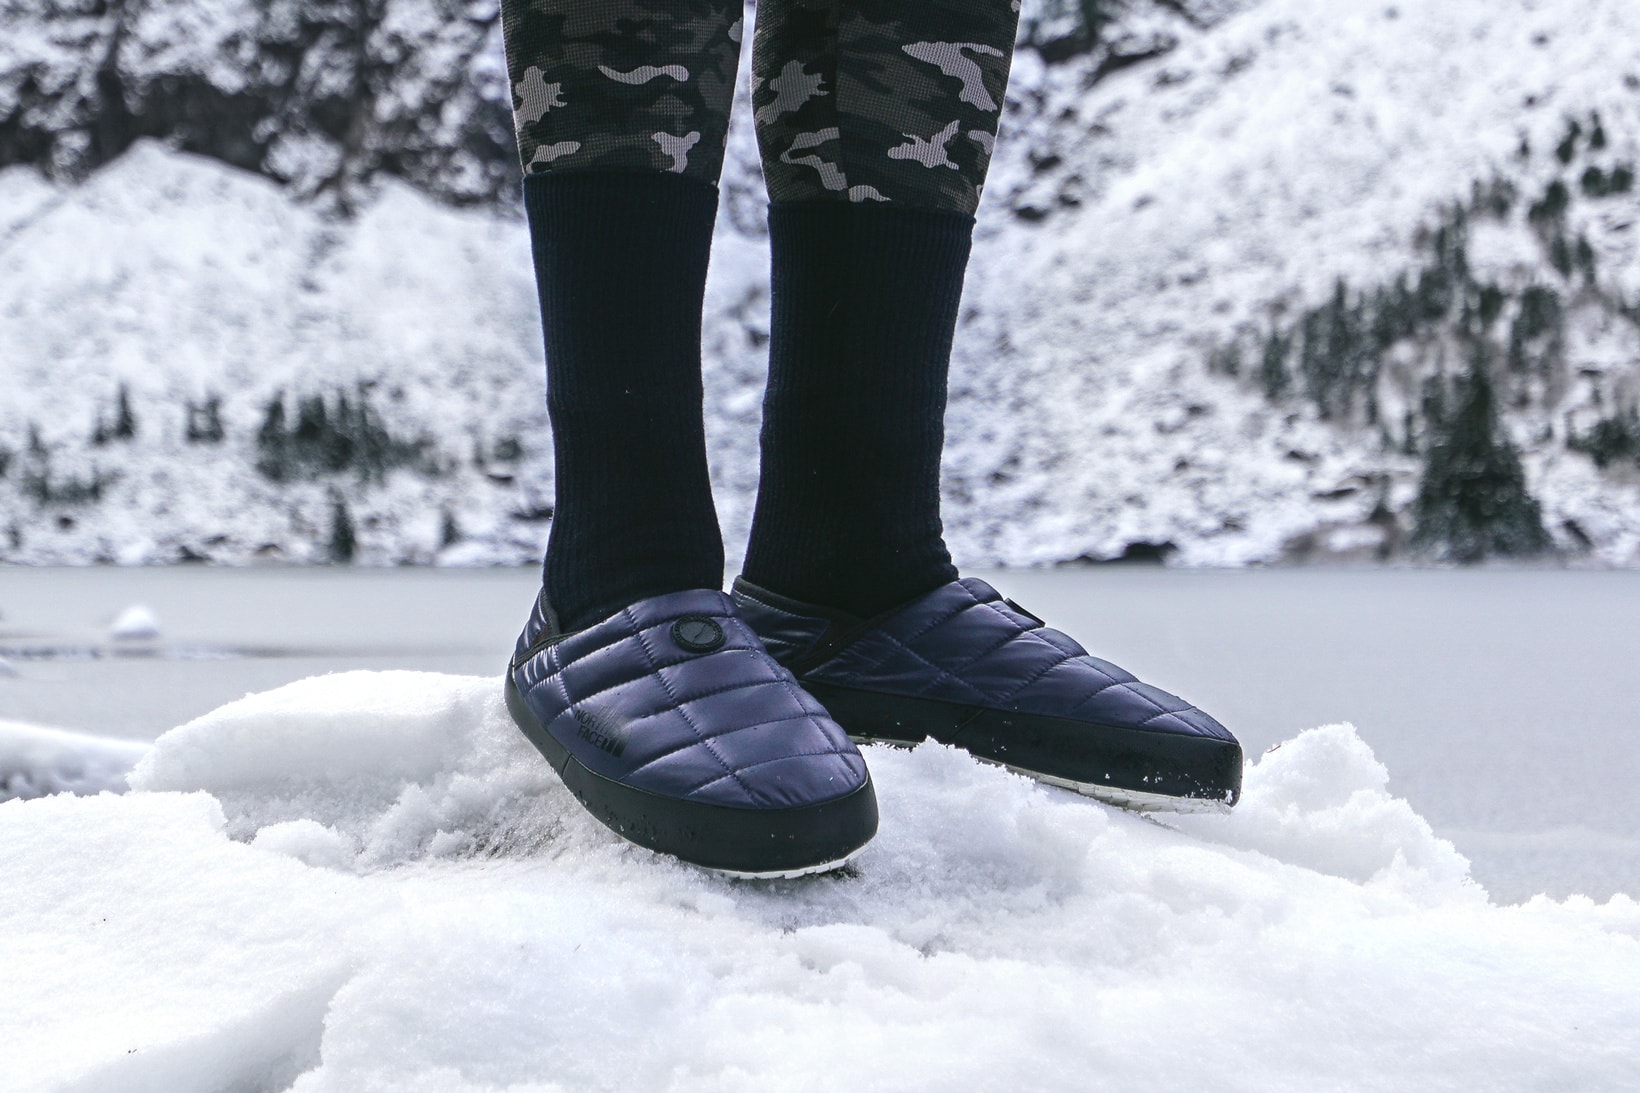 Publish Brand The North Face “Midnight in Antarctica” Footwear